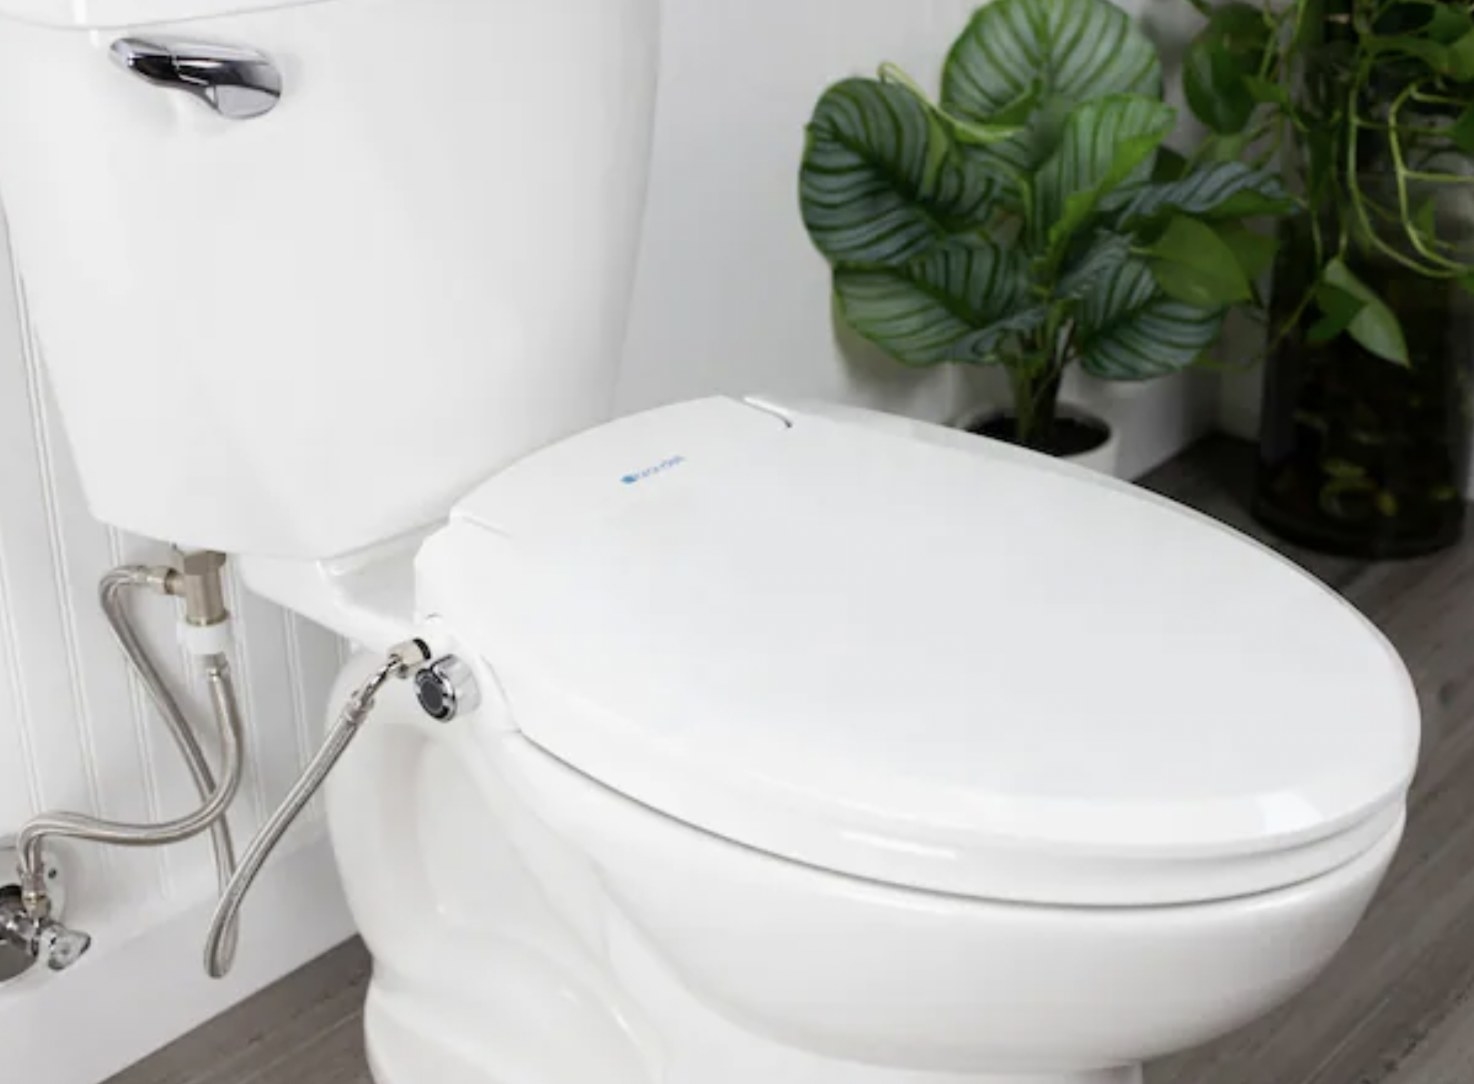 a bidet attached to a toilet